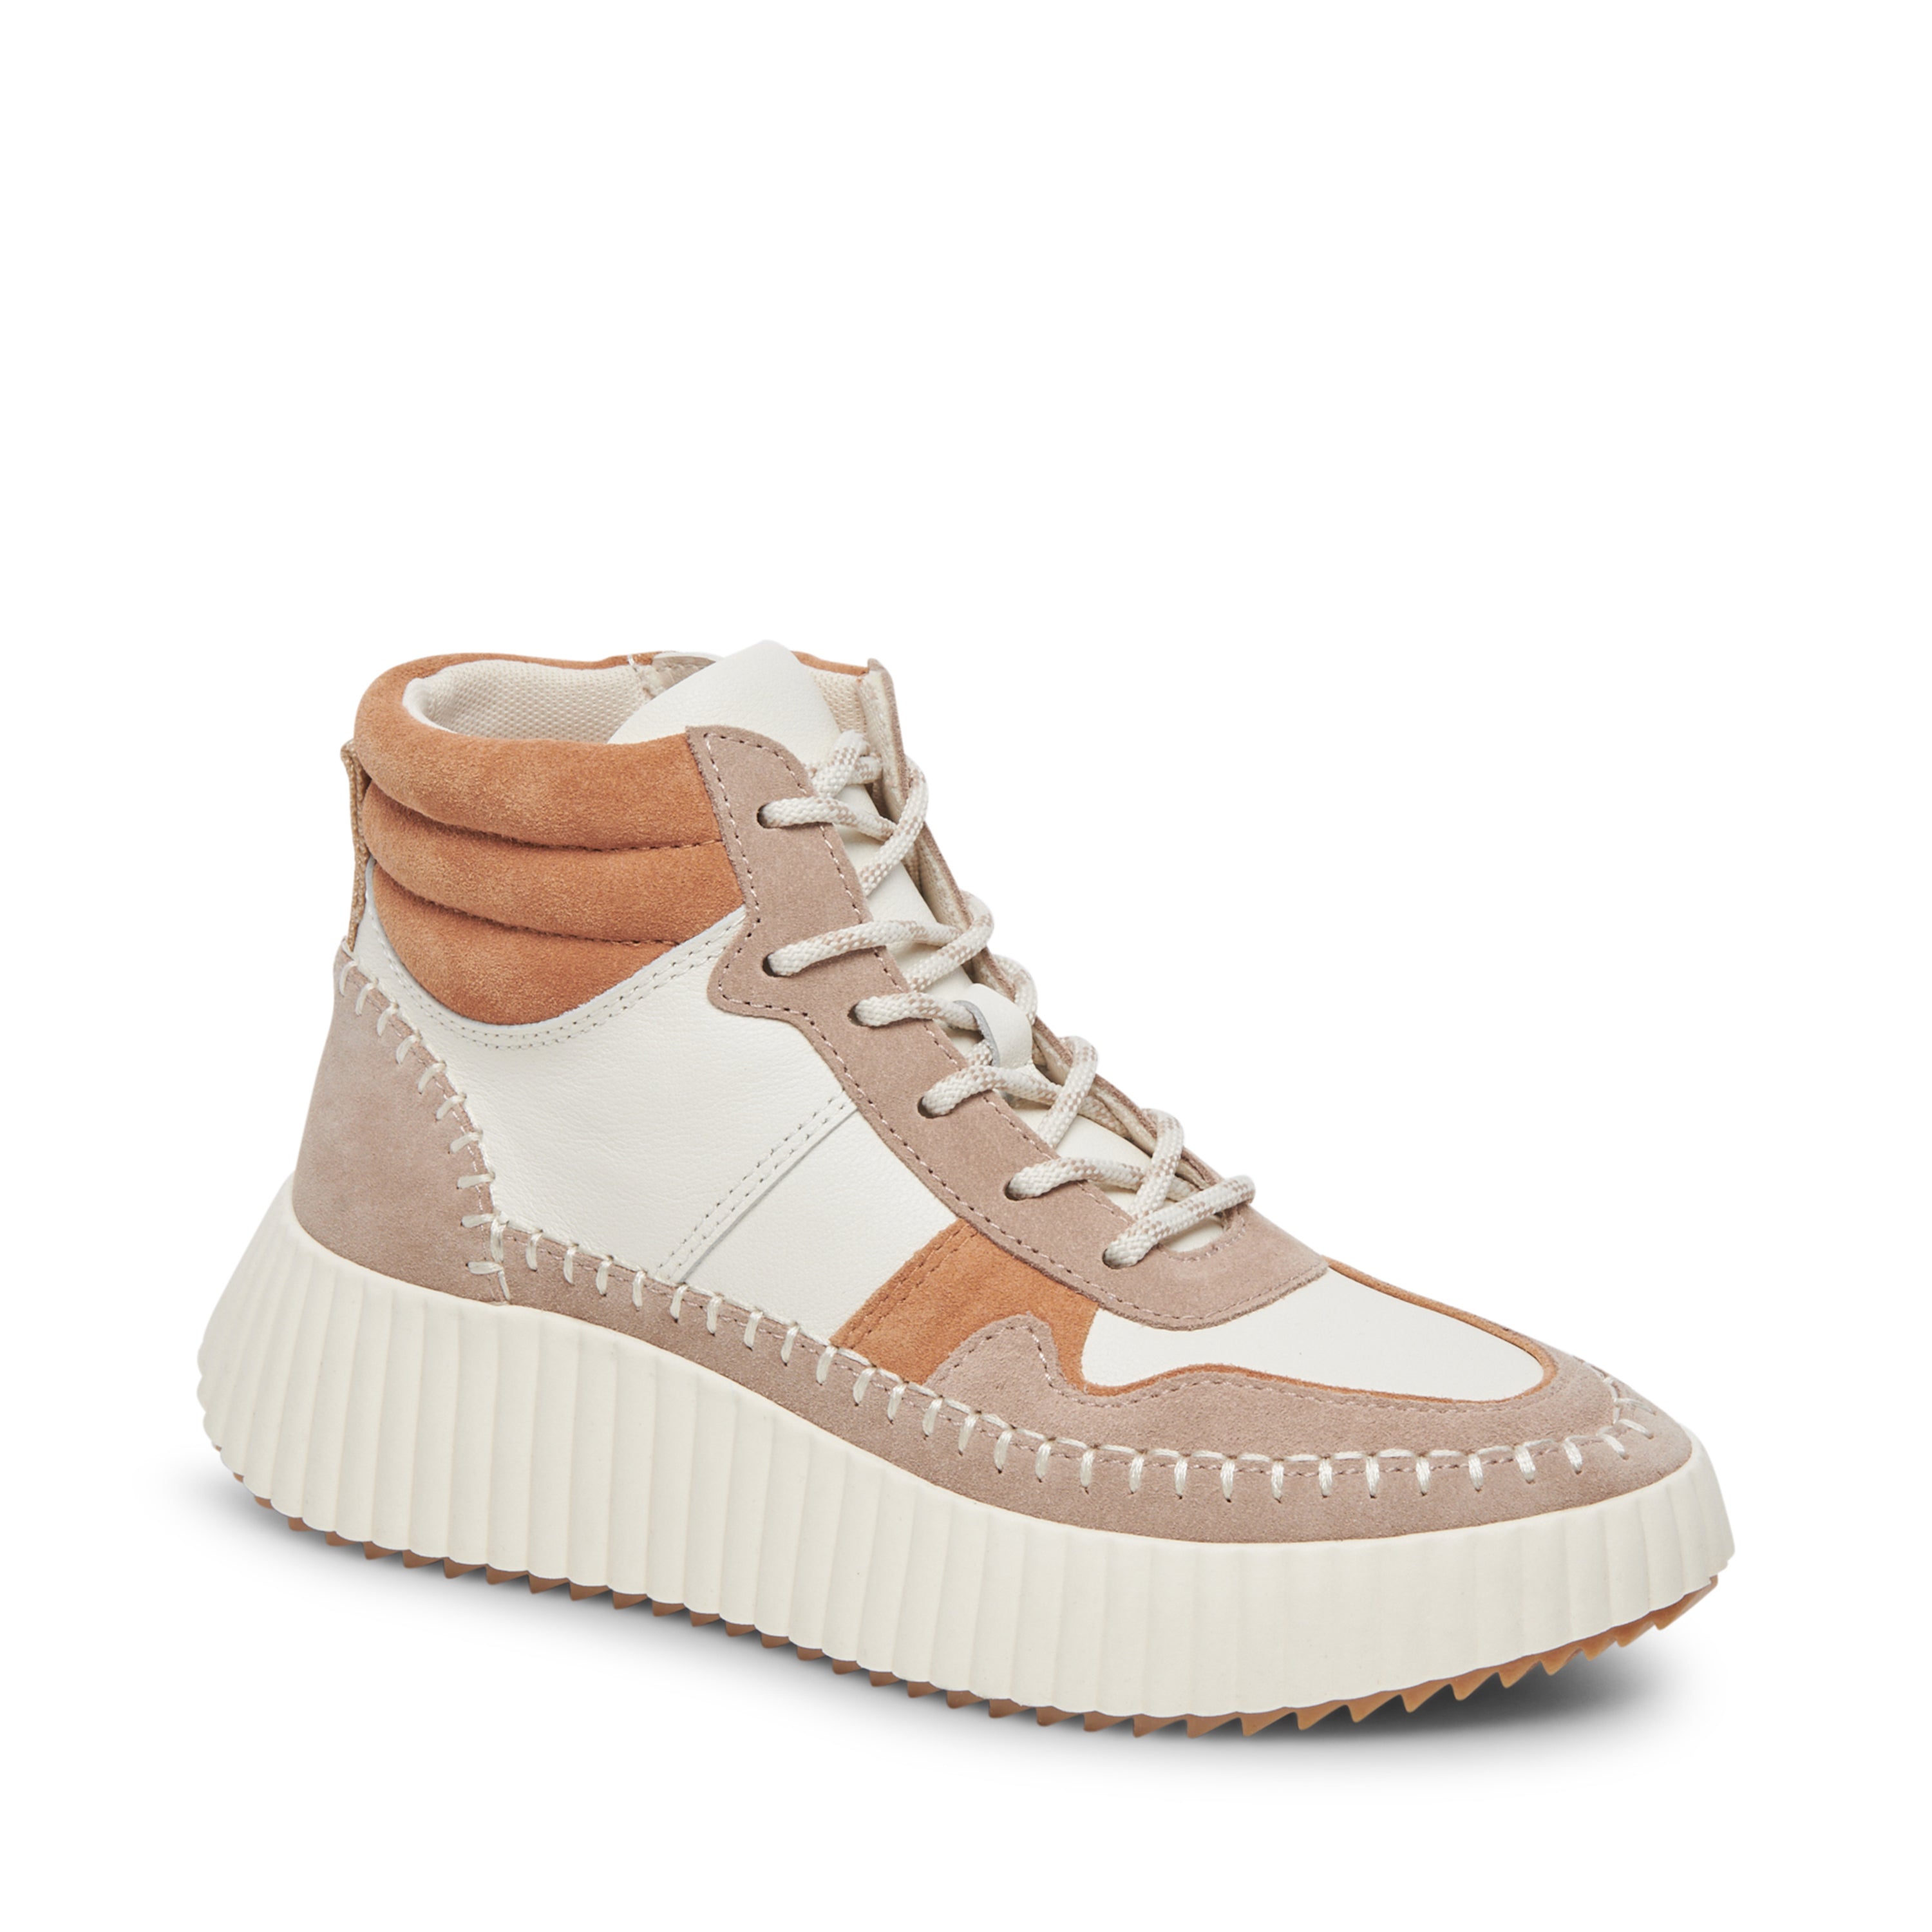 Daley Taupe Multi Tenis Cafes Multi